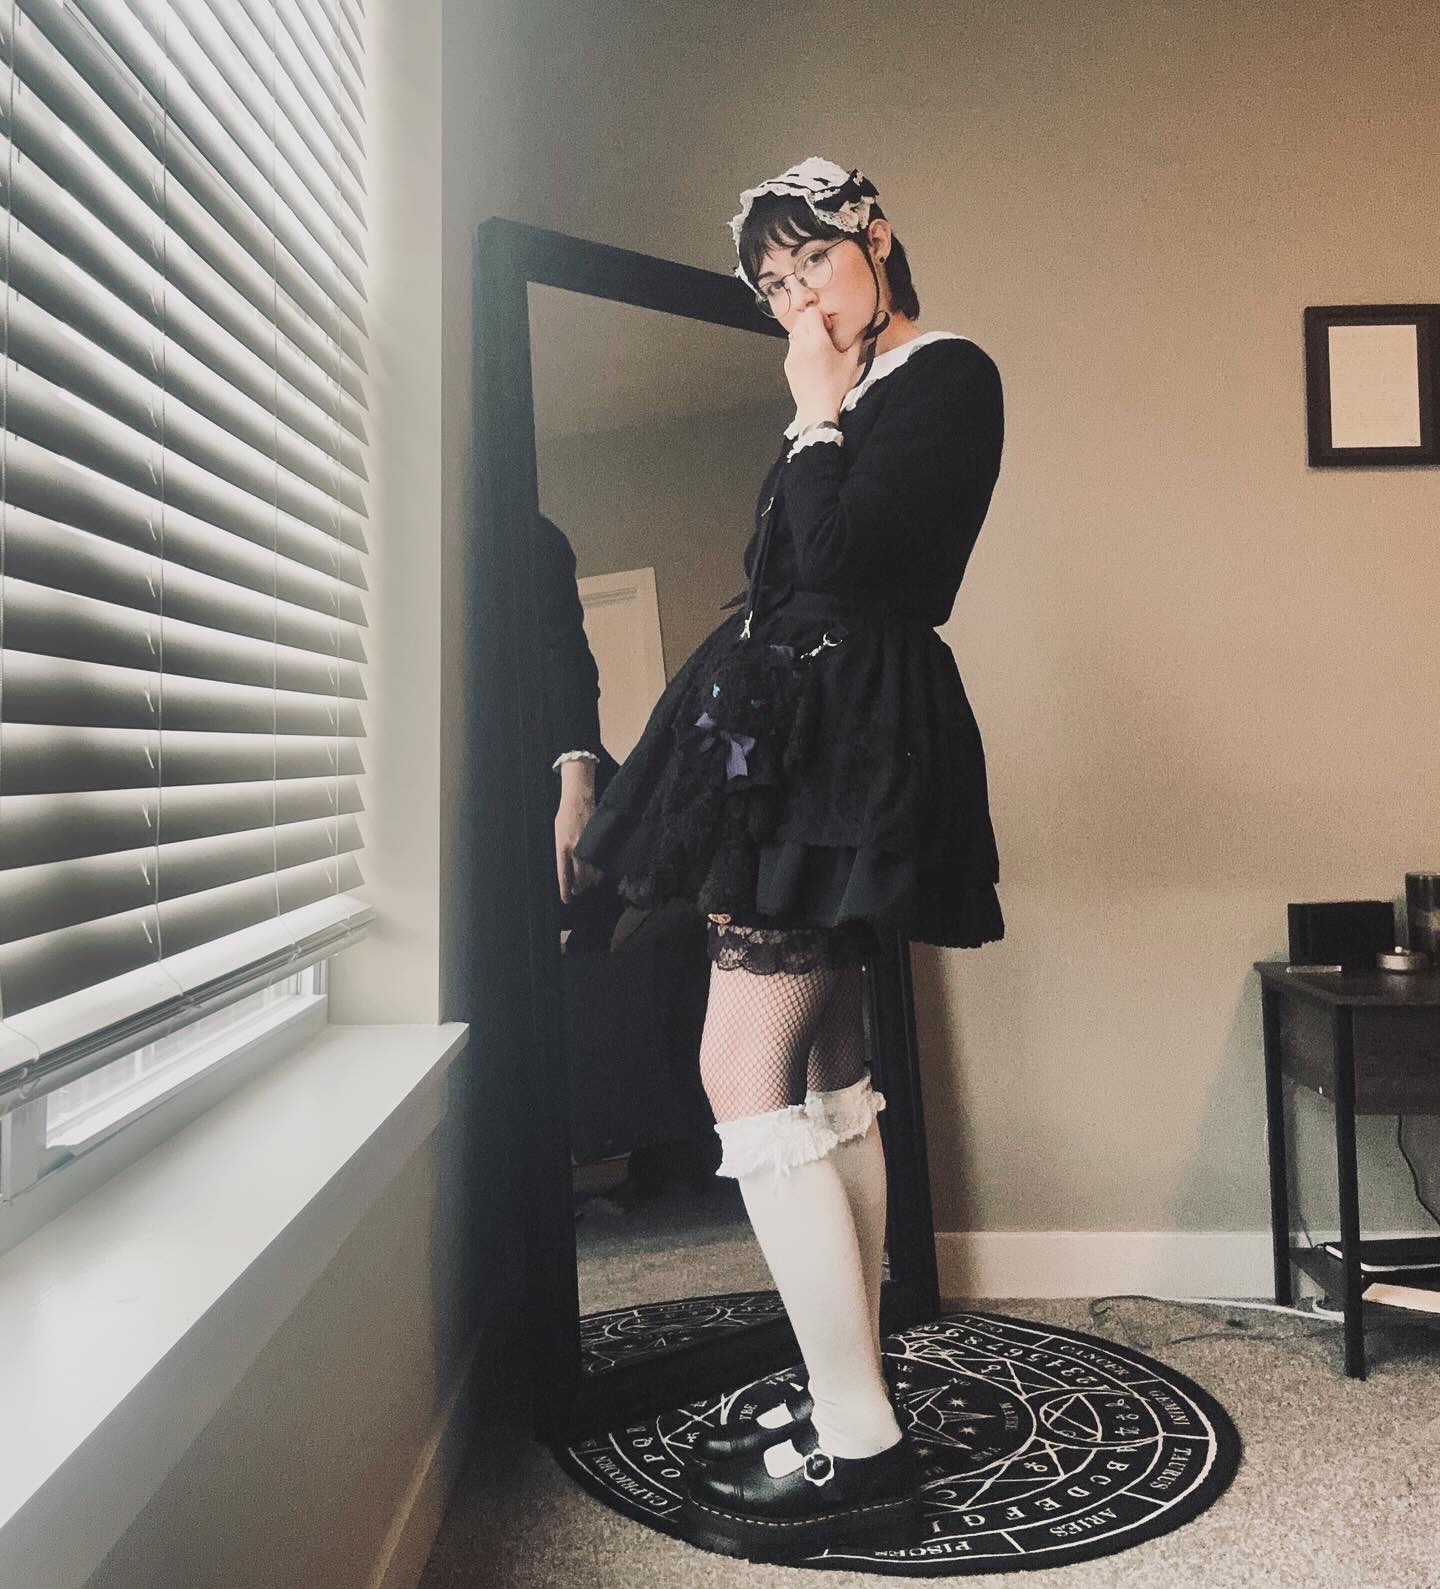 My coord including a rectangle headdress, a short BtSSB skirt, and Doc Martens mary janes